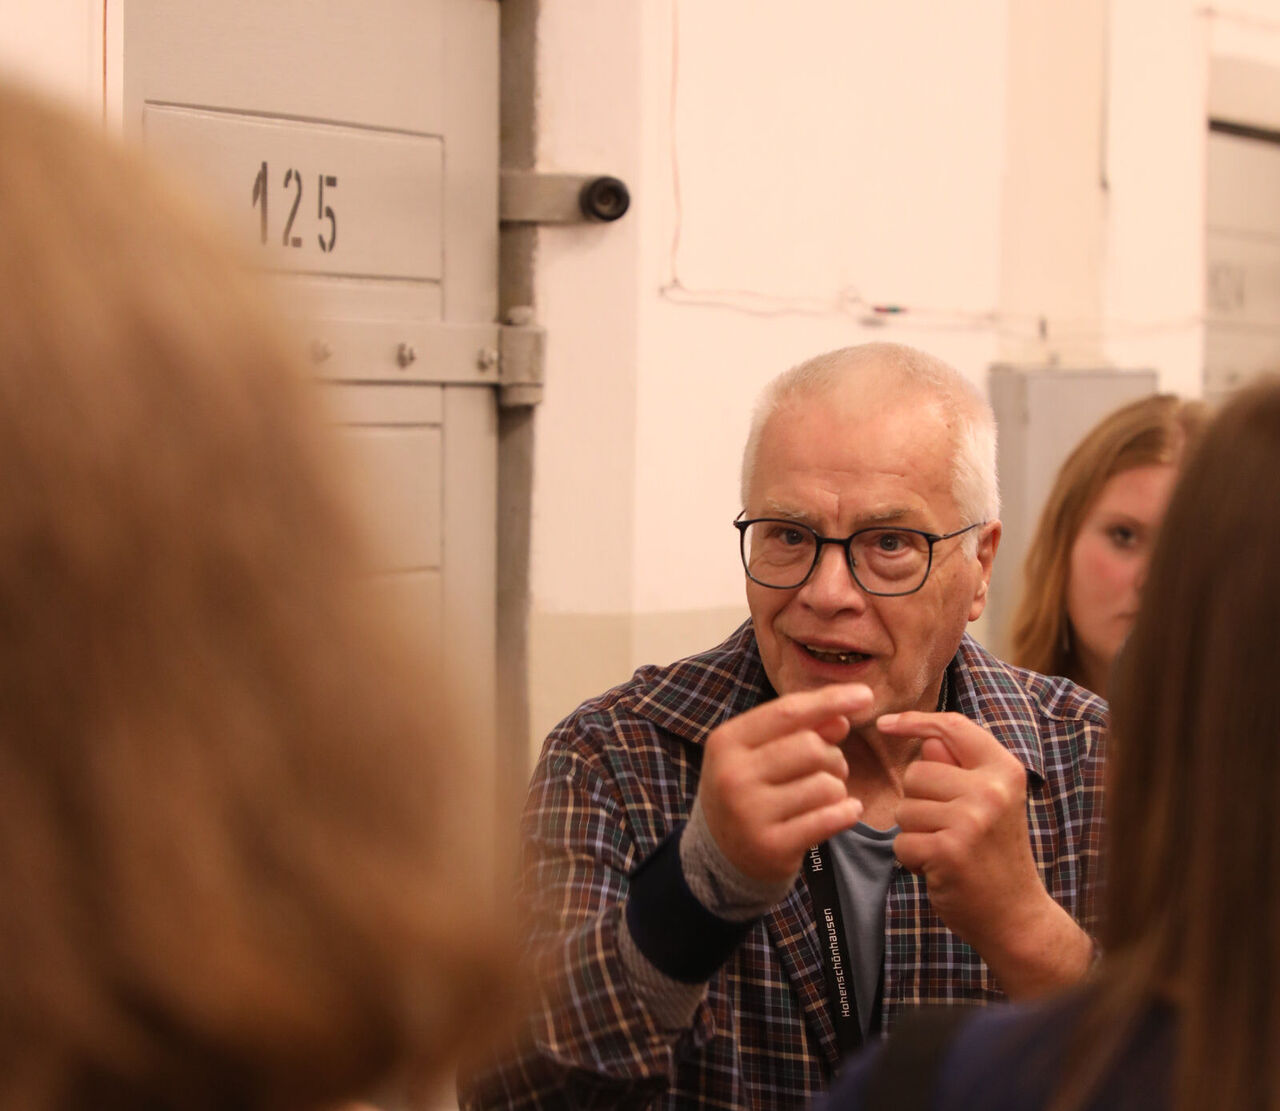 Guided tour of the Stasi prison by a contemporary witness